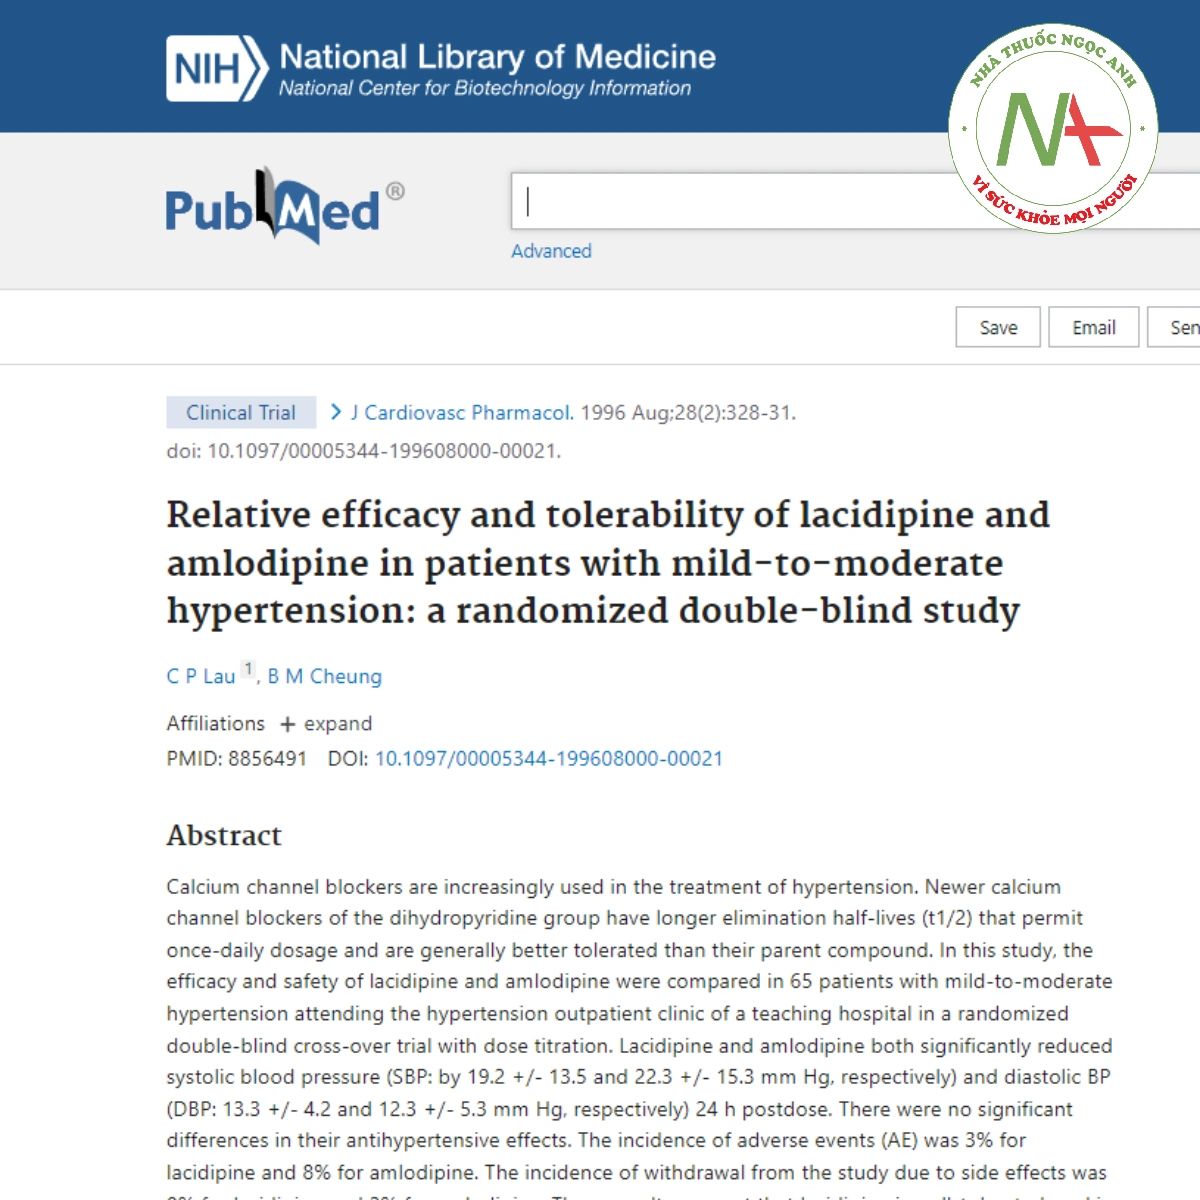 Relative efficacy and tolerability of lacidipine and amlodipine in patients with mild-to-moderate hypertension_ a randomized double-blind study